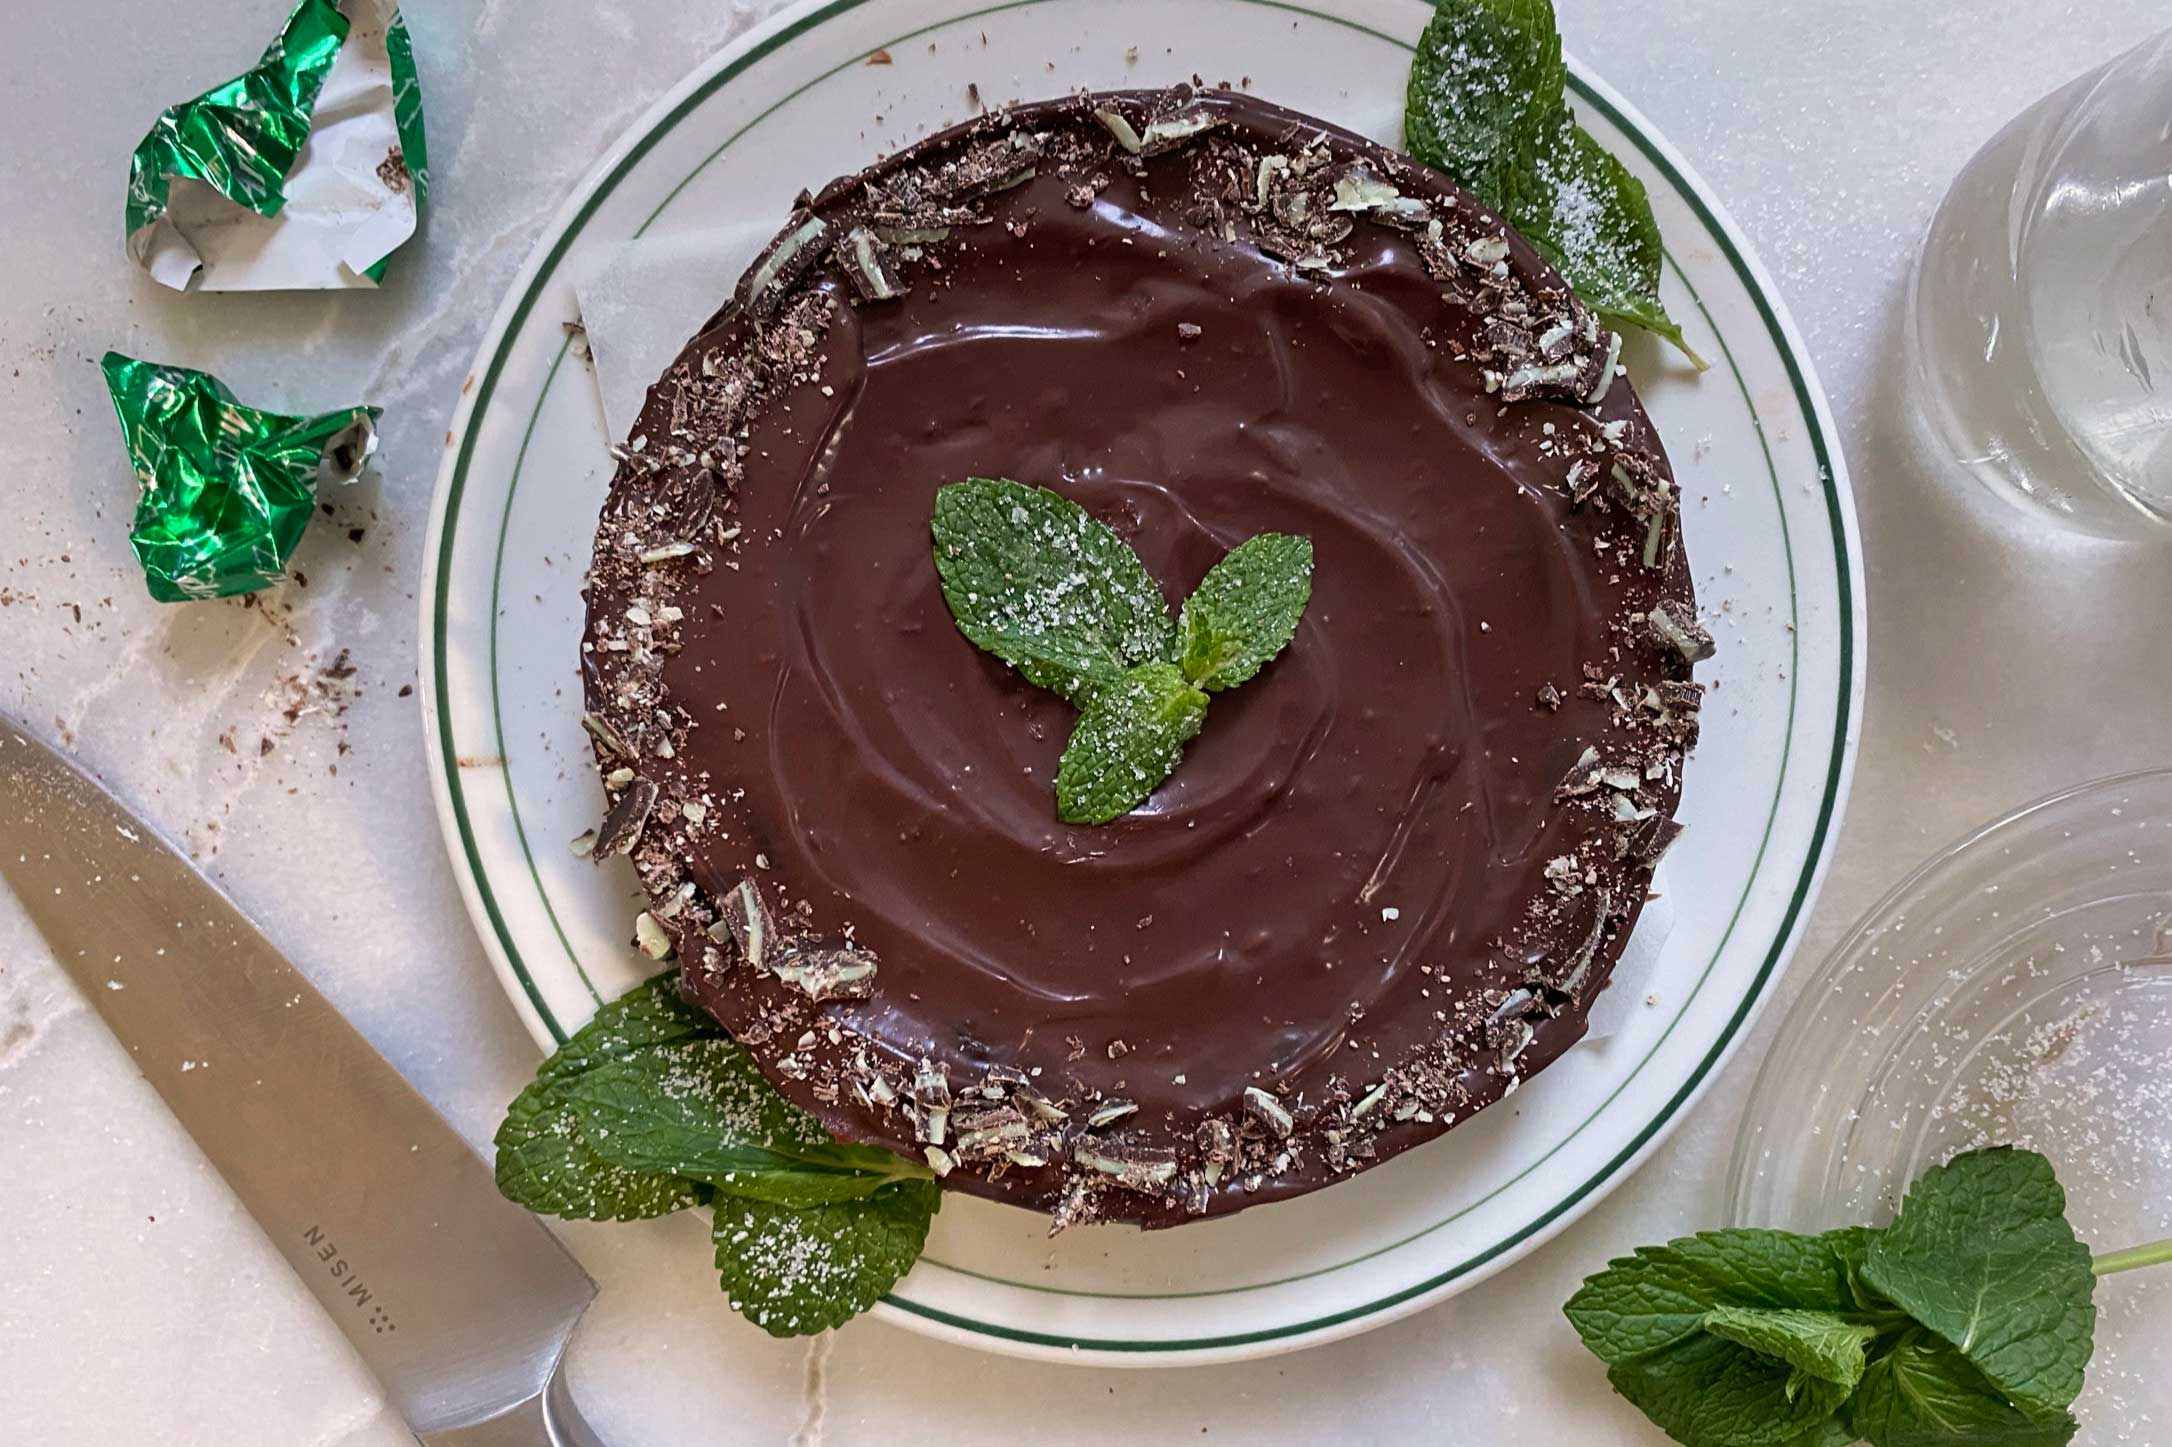 A flourless chocolate cake decorated with sugar mint leaves and chopped mint candies